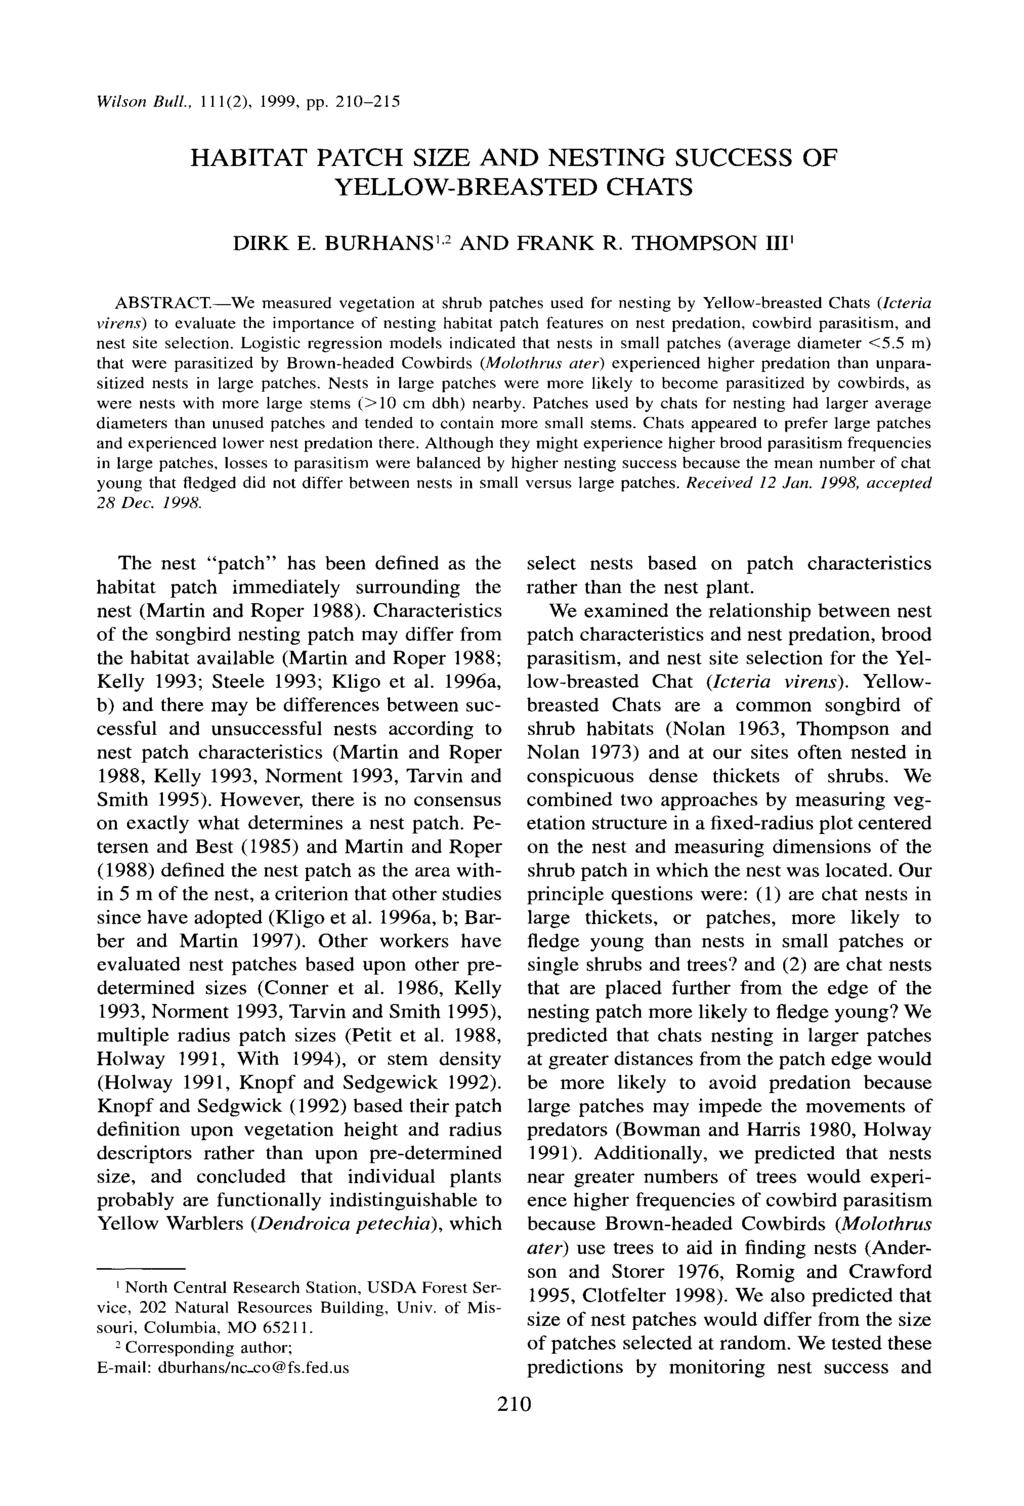 Wilson Bull., 11 l(2), 1999, pp. 210-215 HABITAT PATCH SIZE AND NESTING SUCCESS OF YELLOW-BREASTED CHATS DIRK E. BURHANS, AND FRANK R. THOMPSON III ABSTRACT.